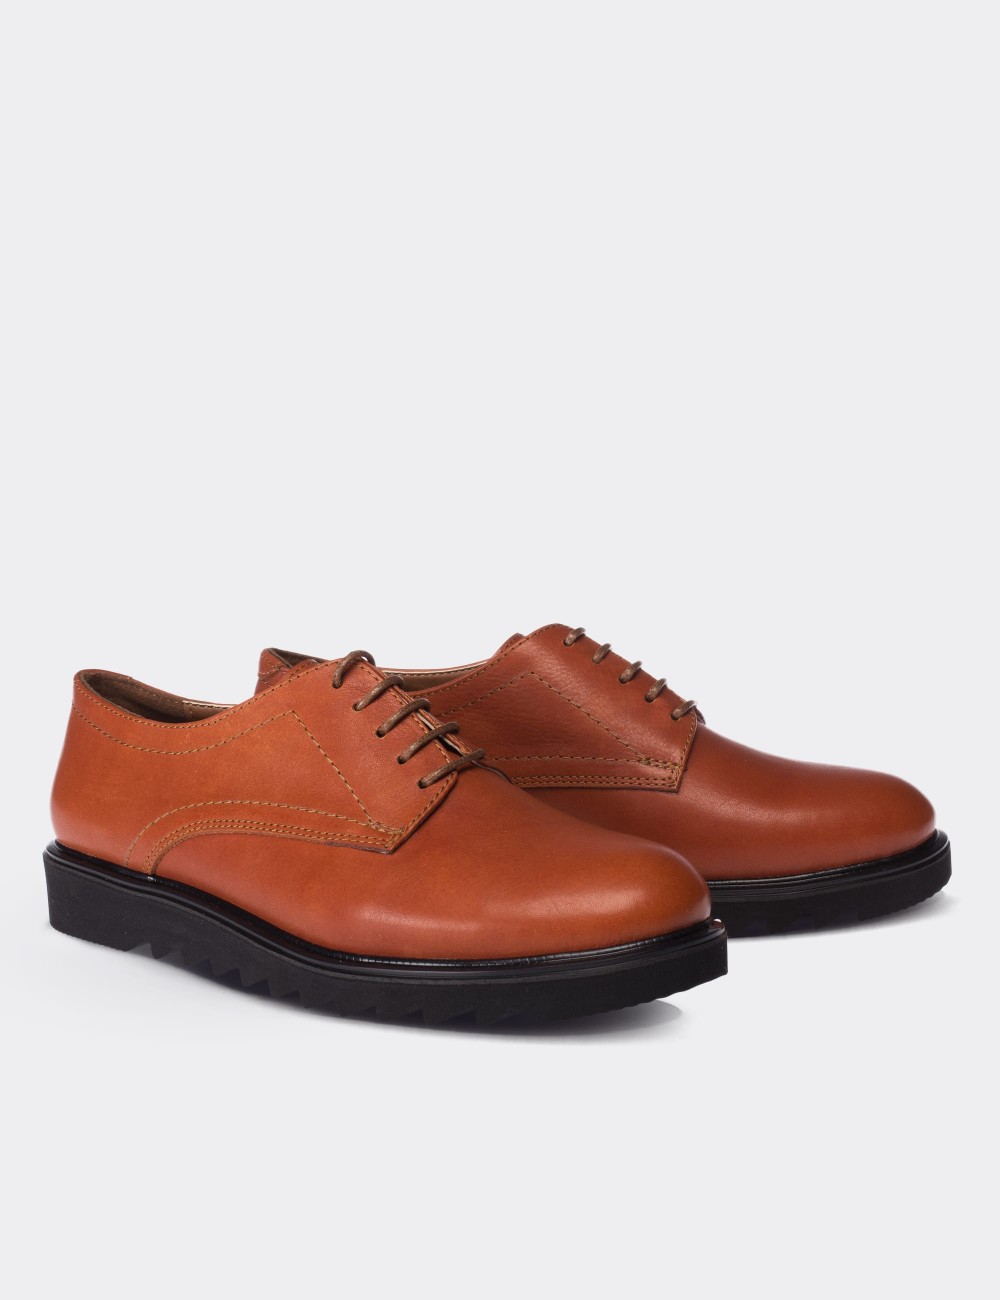 Orange  Leather Lace-up Shoes - 01430ZTRCP01